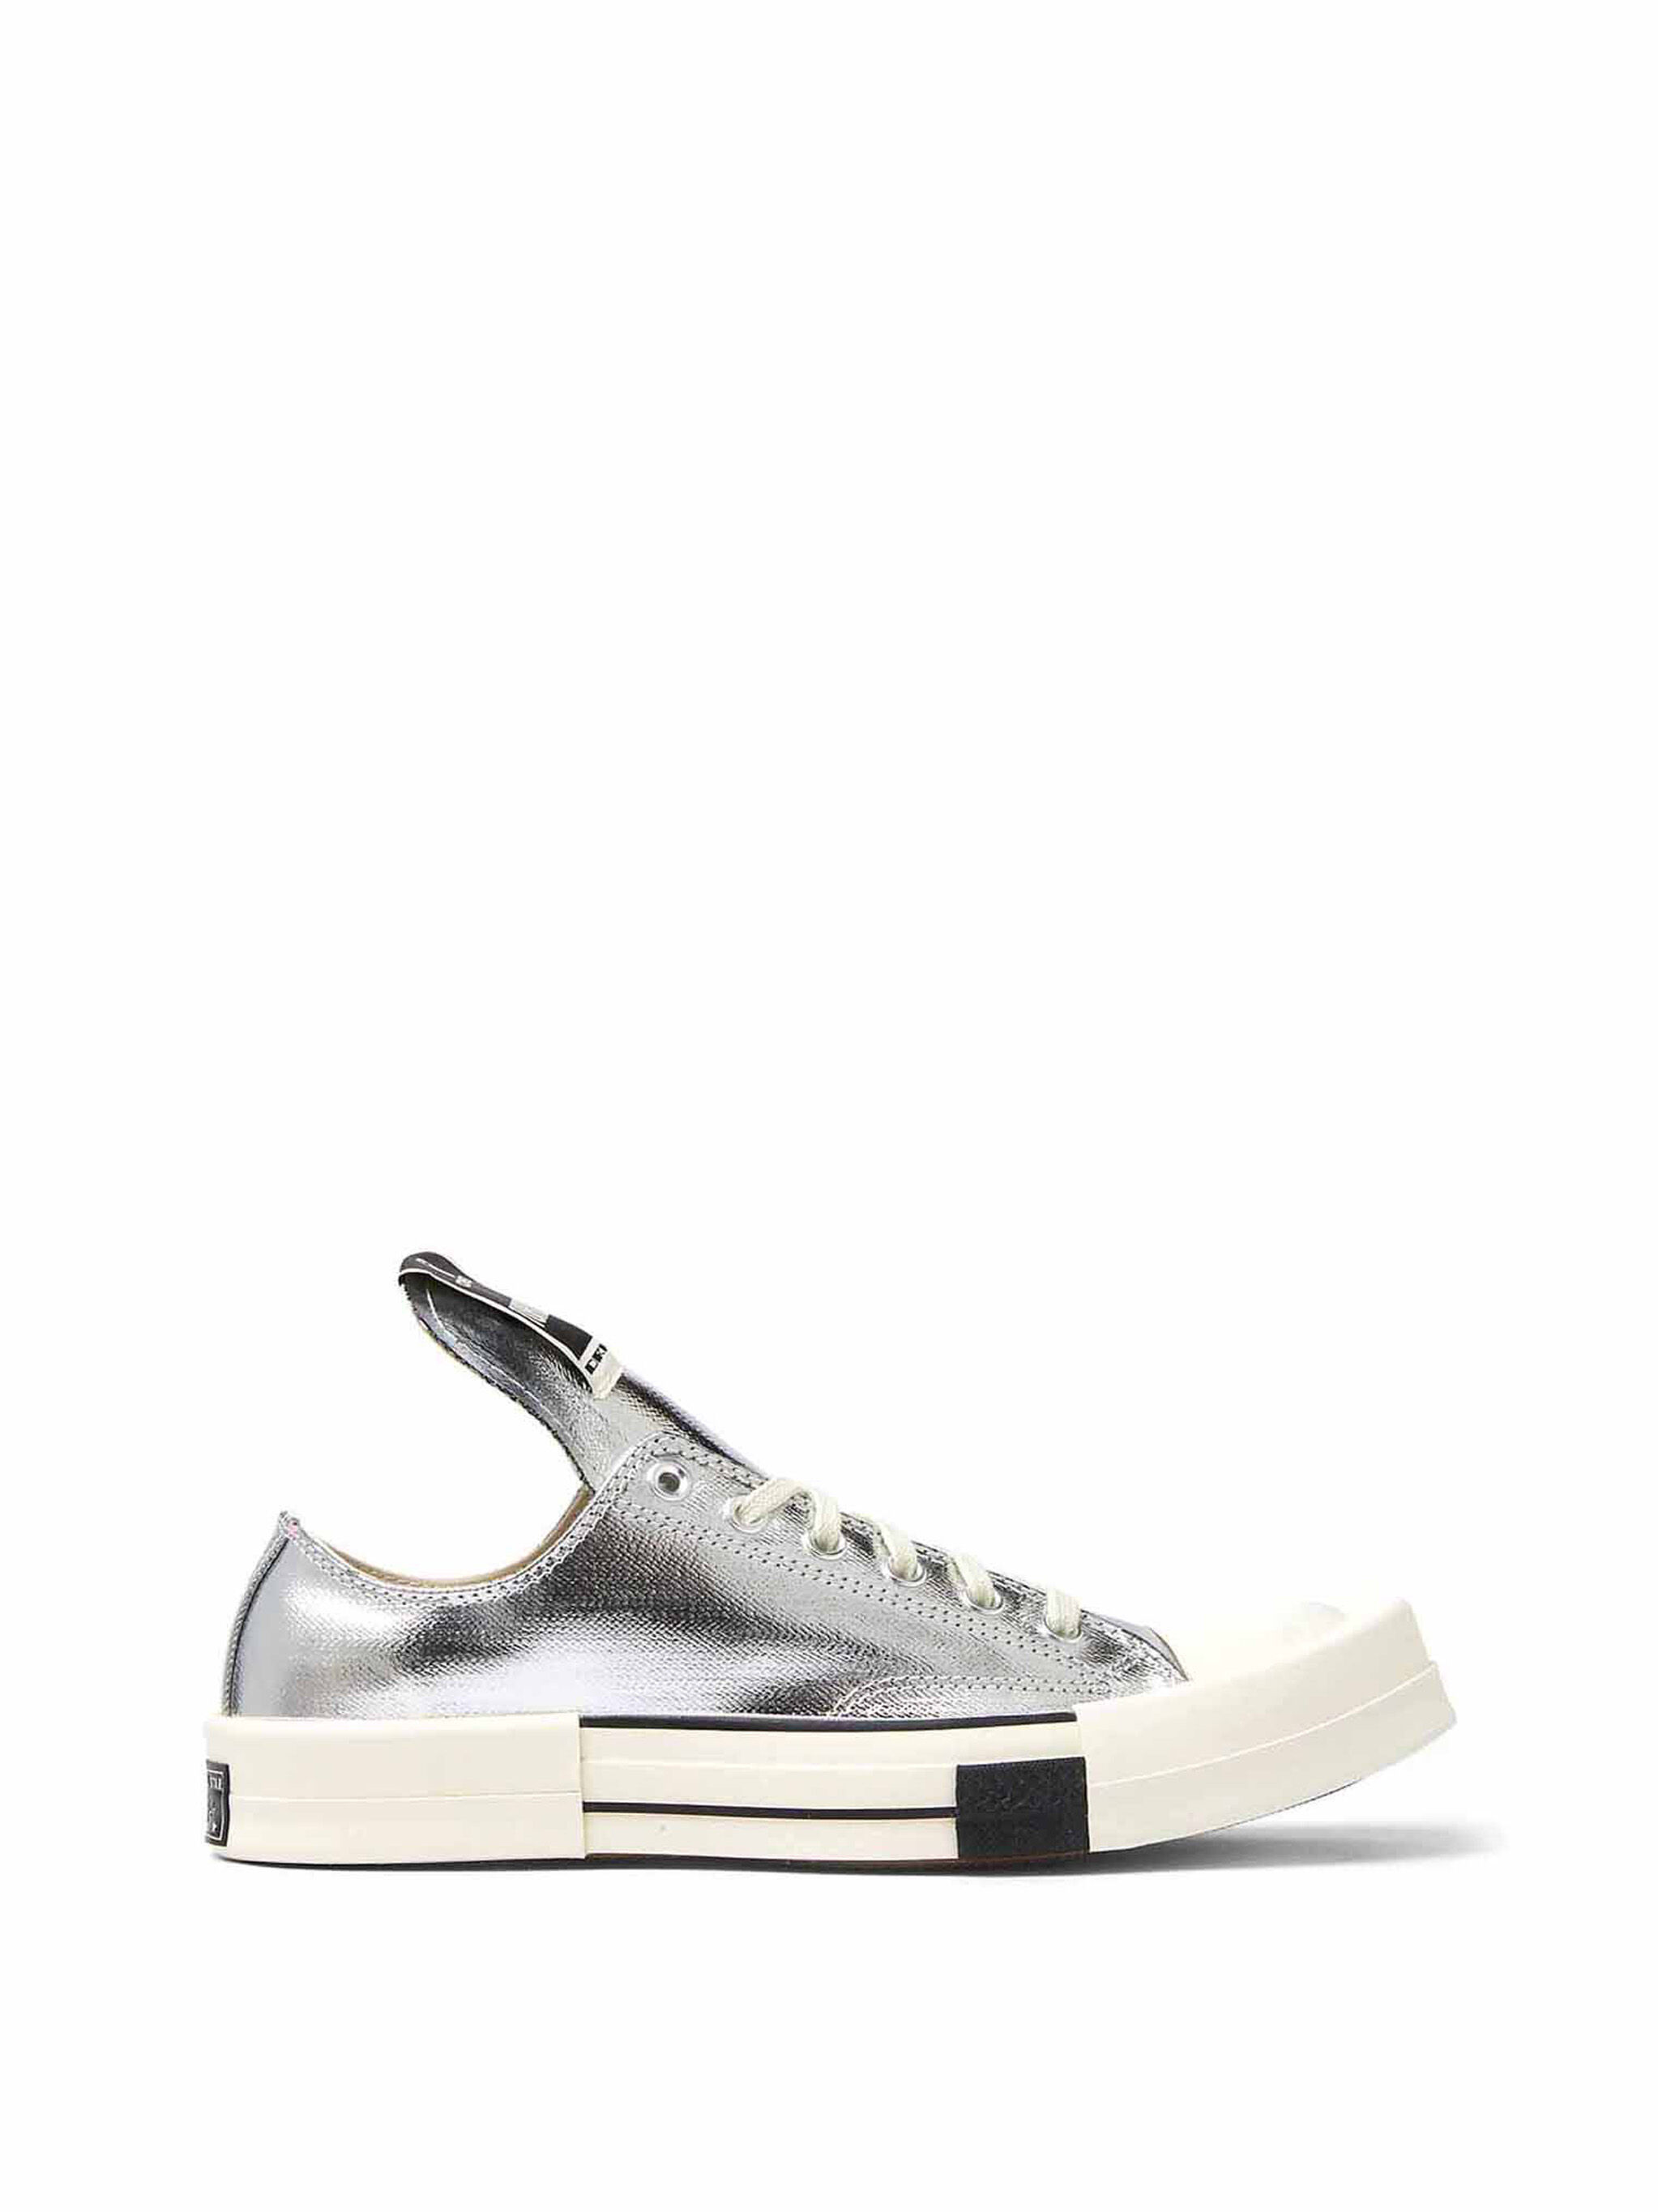 Rick Owens x Converse TURBODRK Low Top Silver Sneakers | THE FLAMEL®